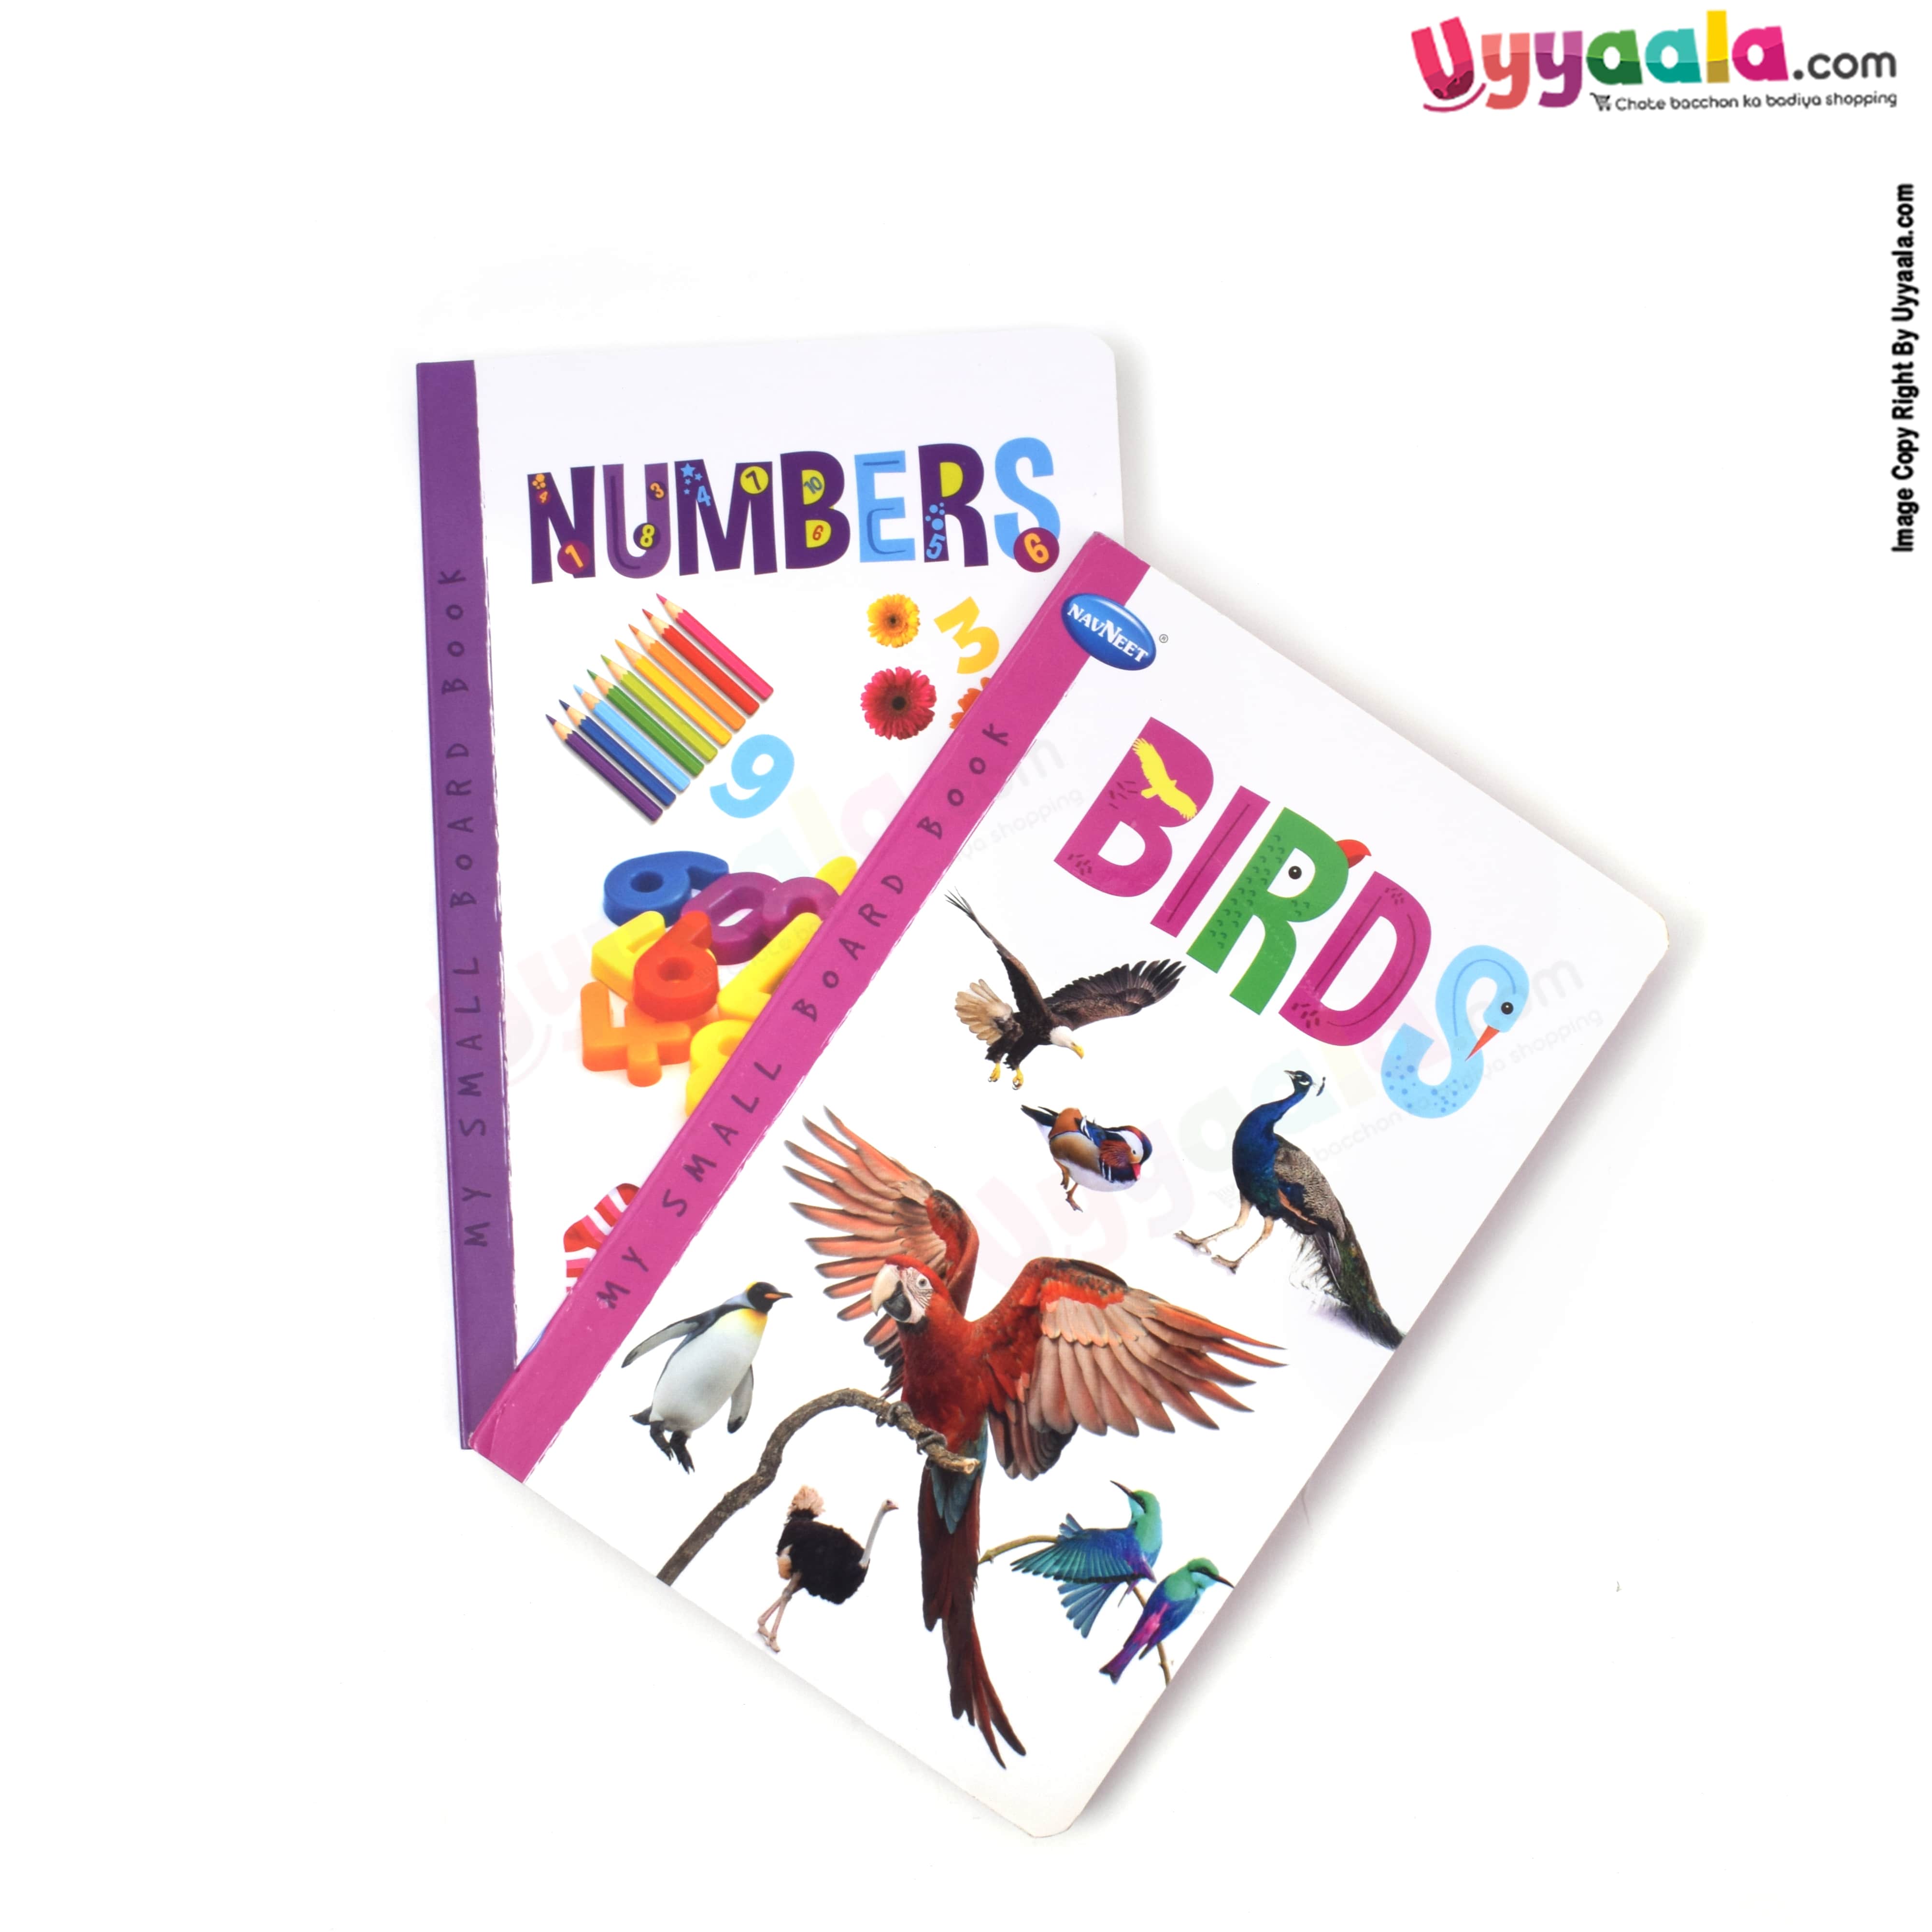 NAVNEET my small board book pack of 2 - birds & numbers